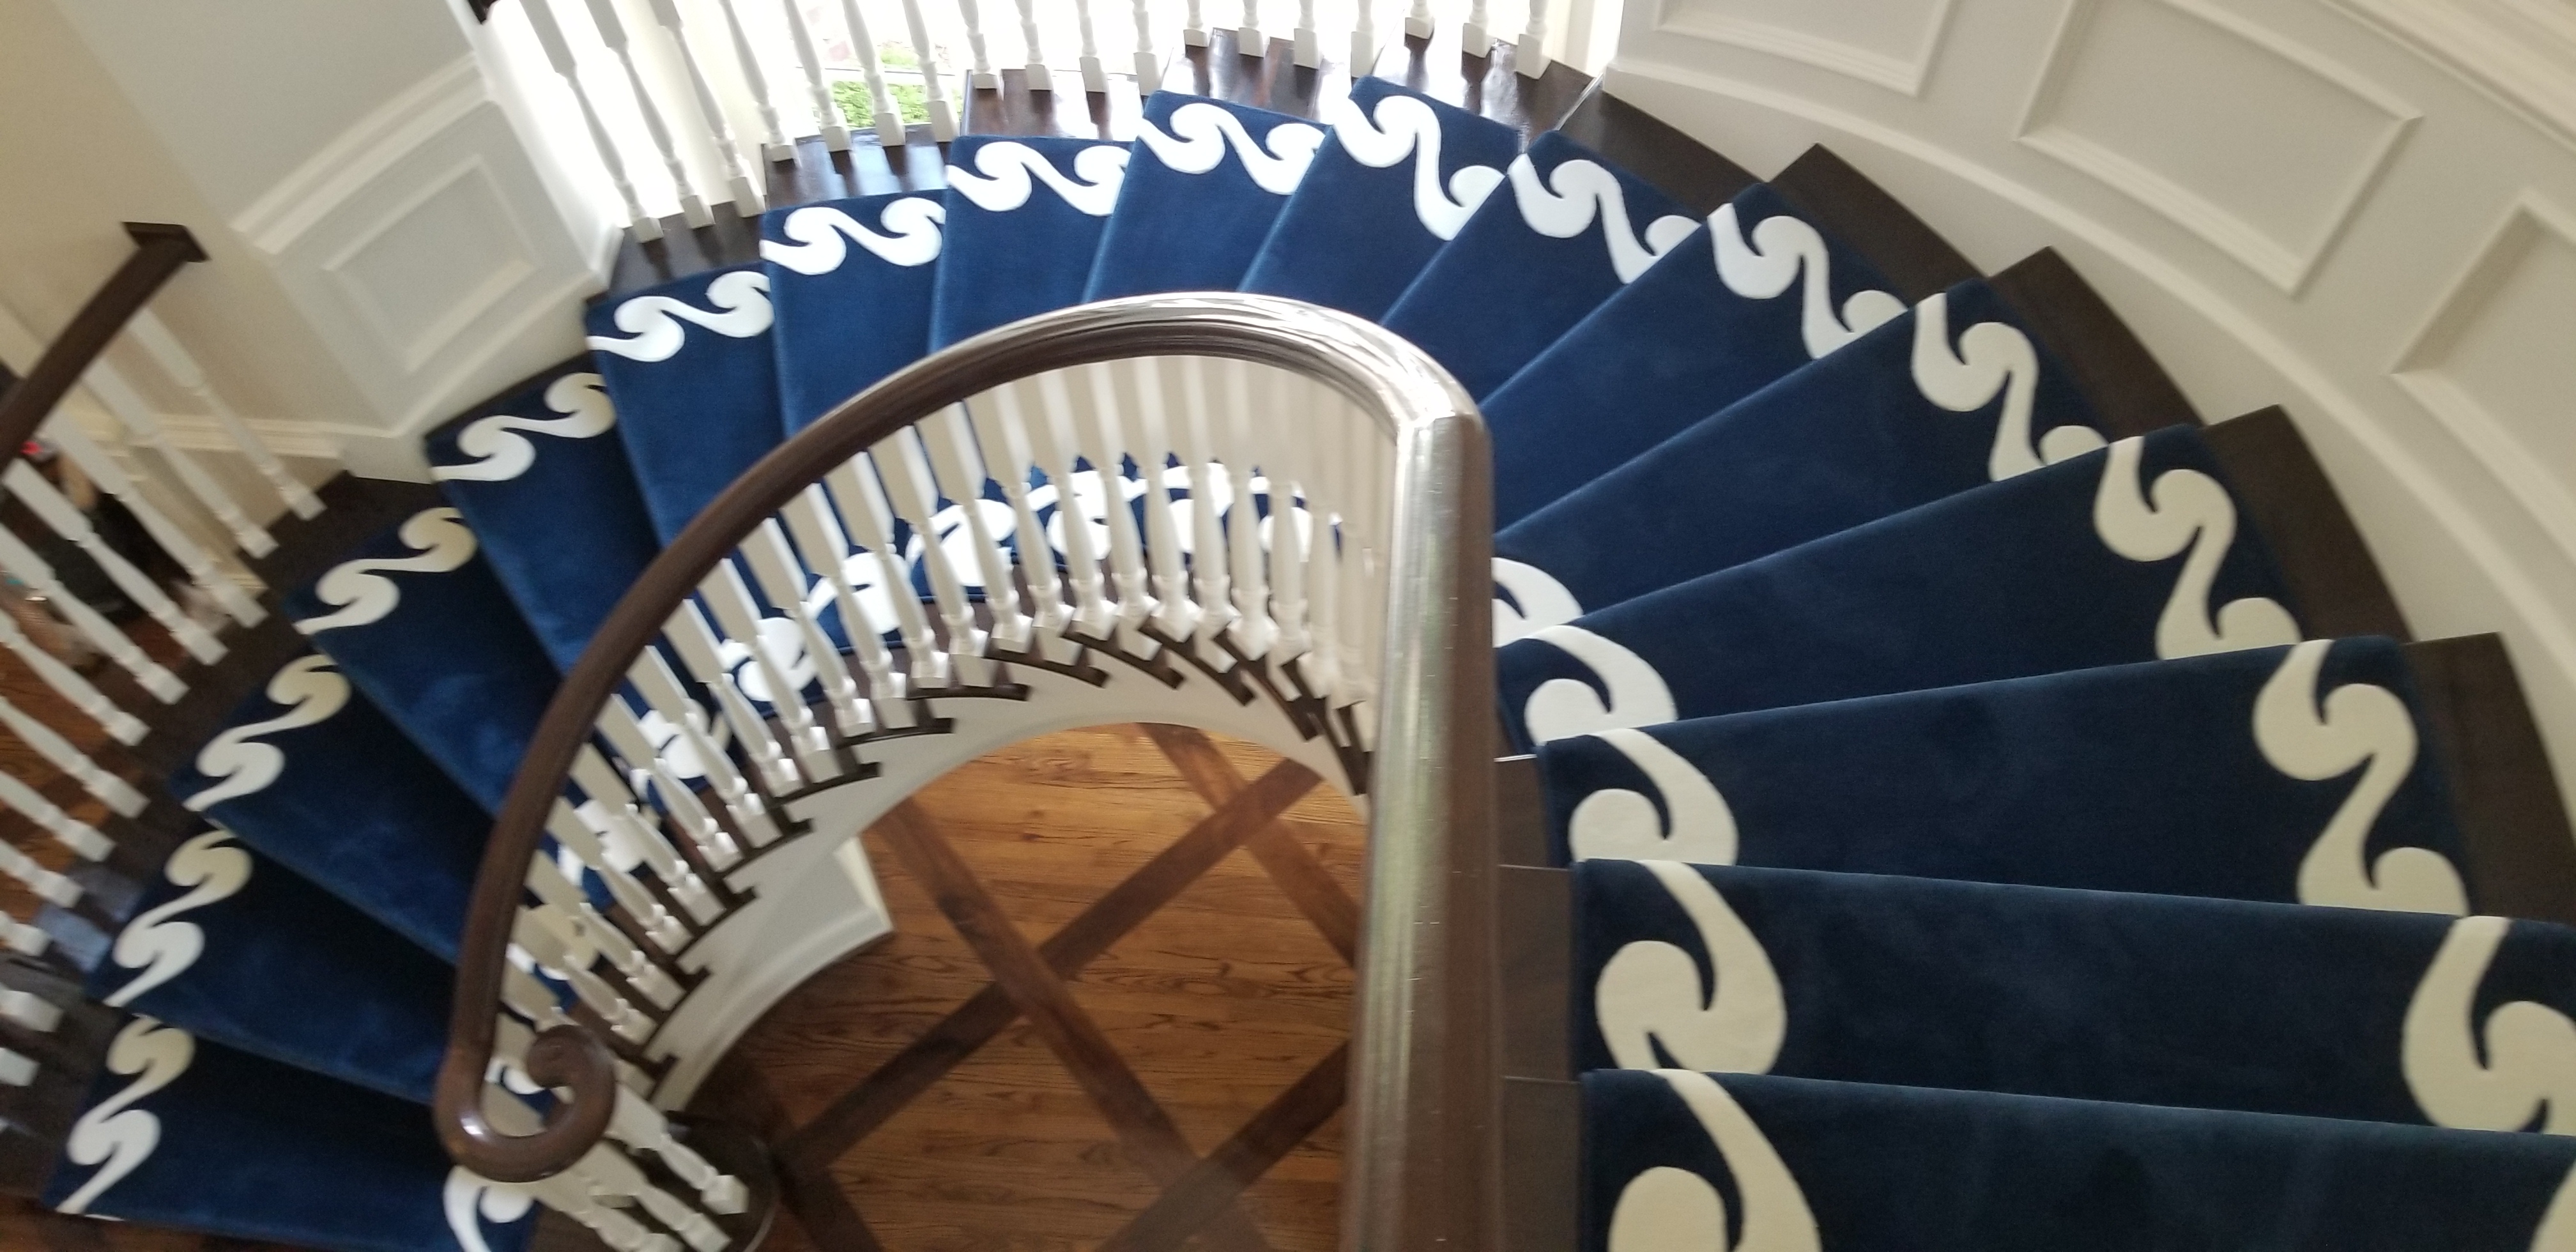 A spiral staircase with blue and white carpet.